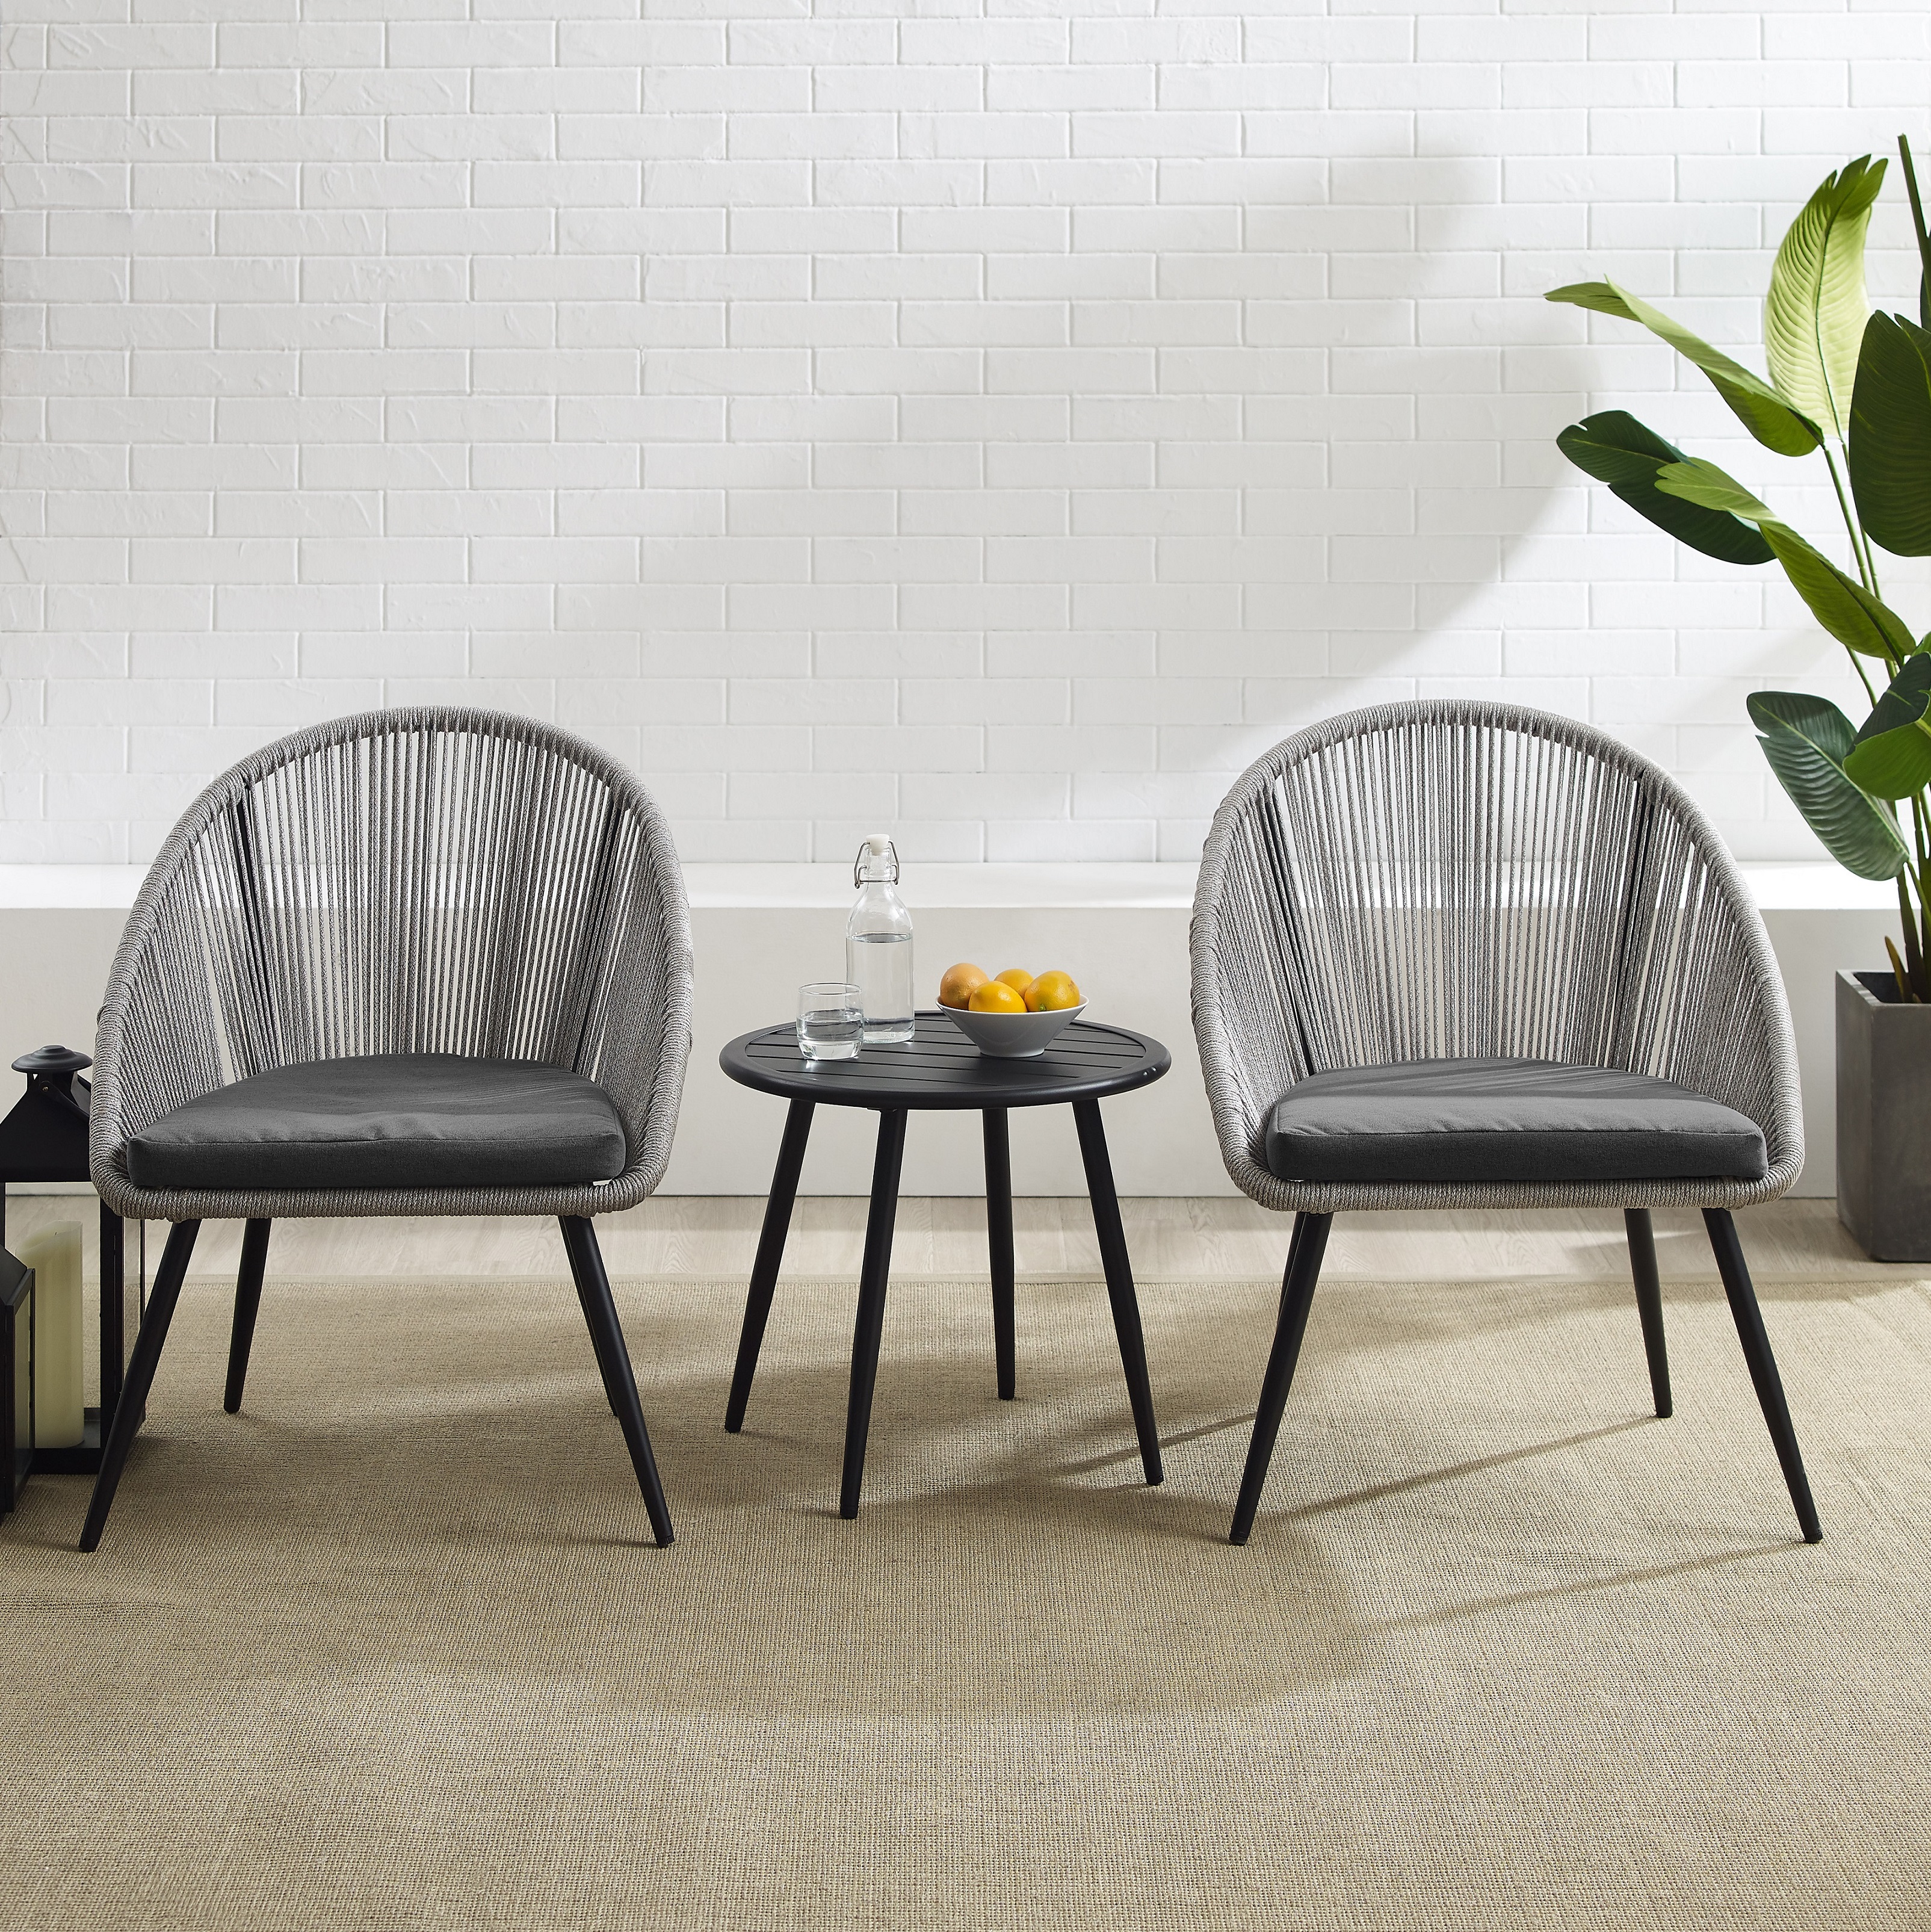 Crosley Furniture Aspen 3Pc Outdoor Rope Chair Set Gray/Matte Black - Side Table & 2 Chairs - image 3 of 17